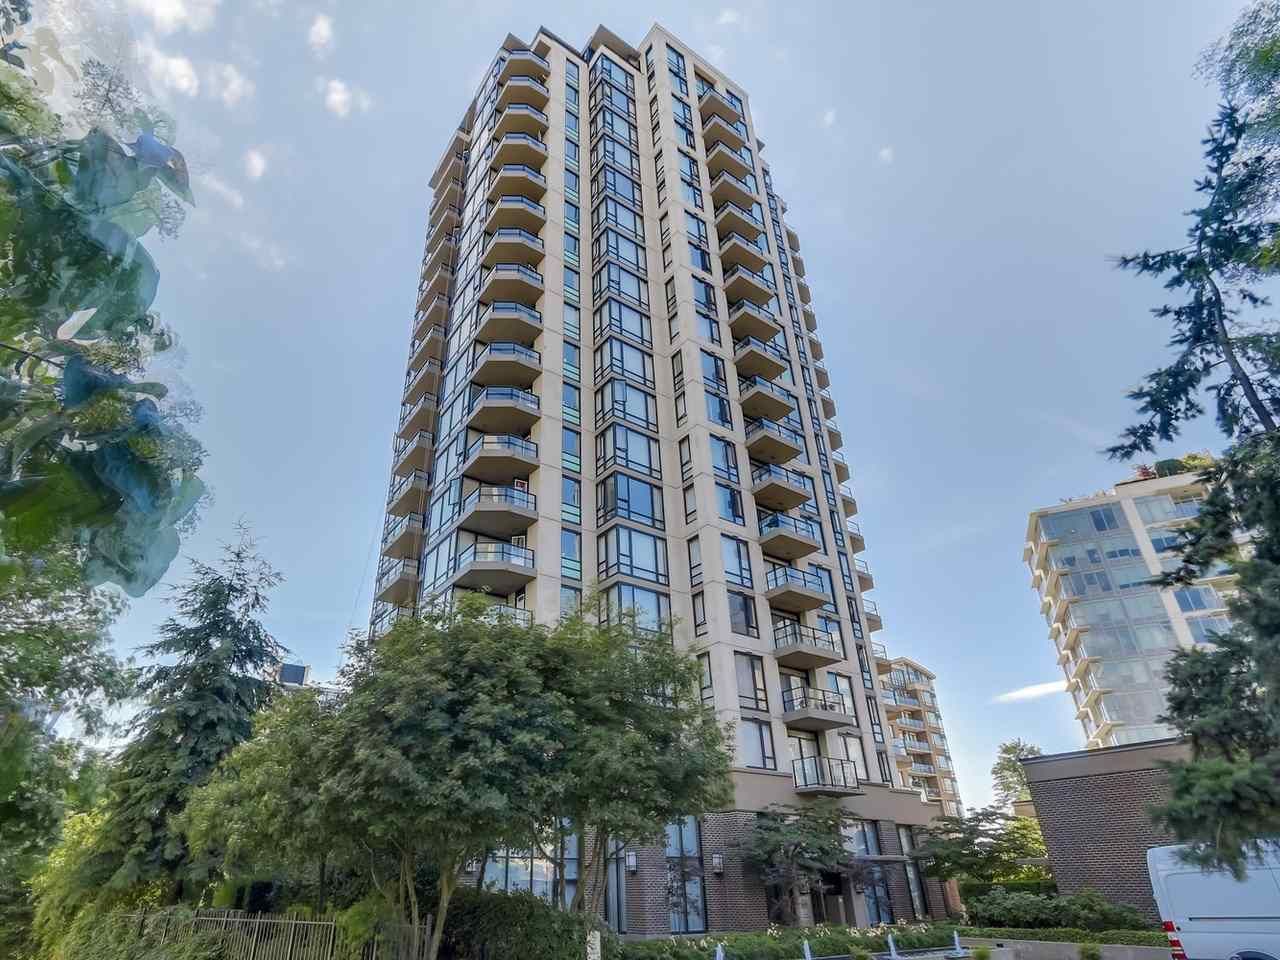 Main Photo: 805 151 W 2ND STREET in : Lower Lonsdale Condo for sale : MLS®# R2086189